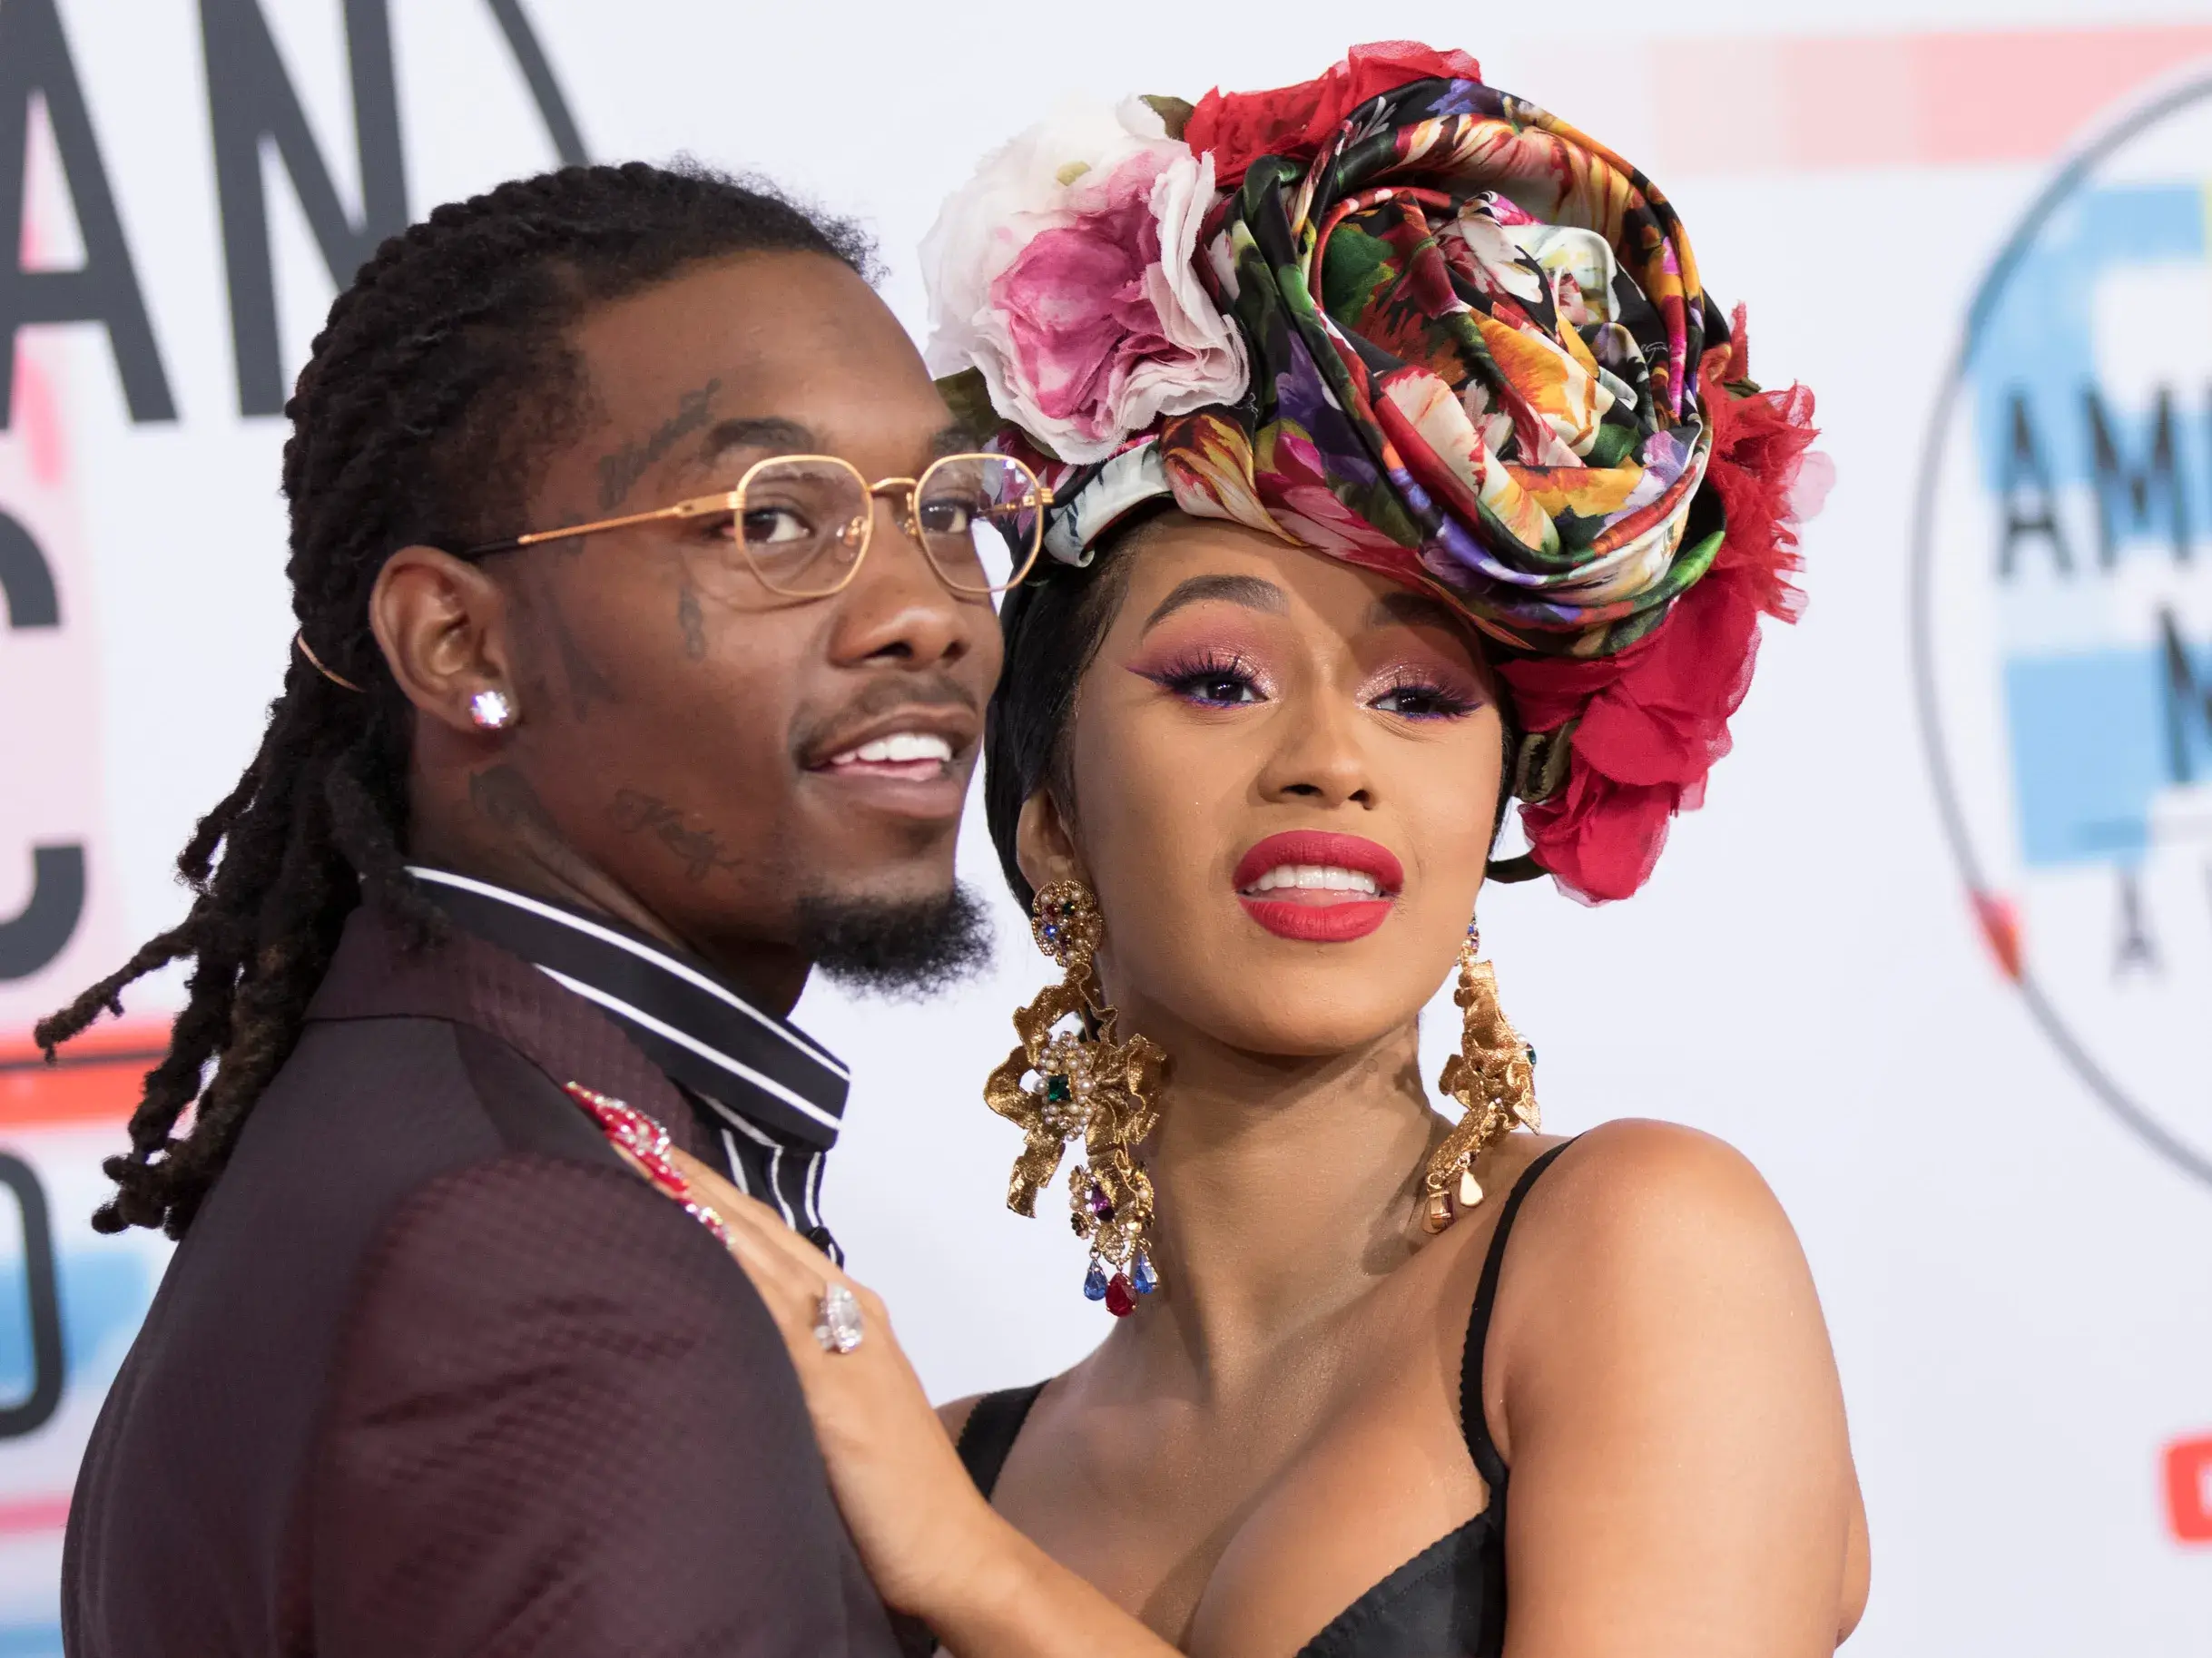 Cardi B and Offset going strong